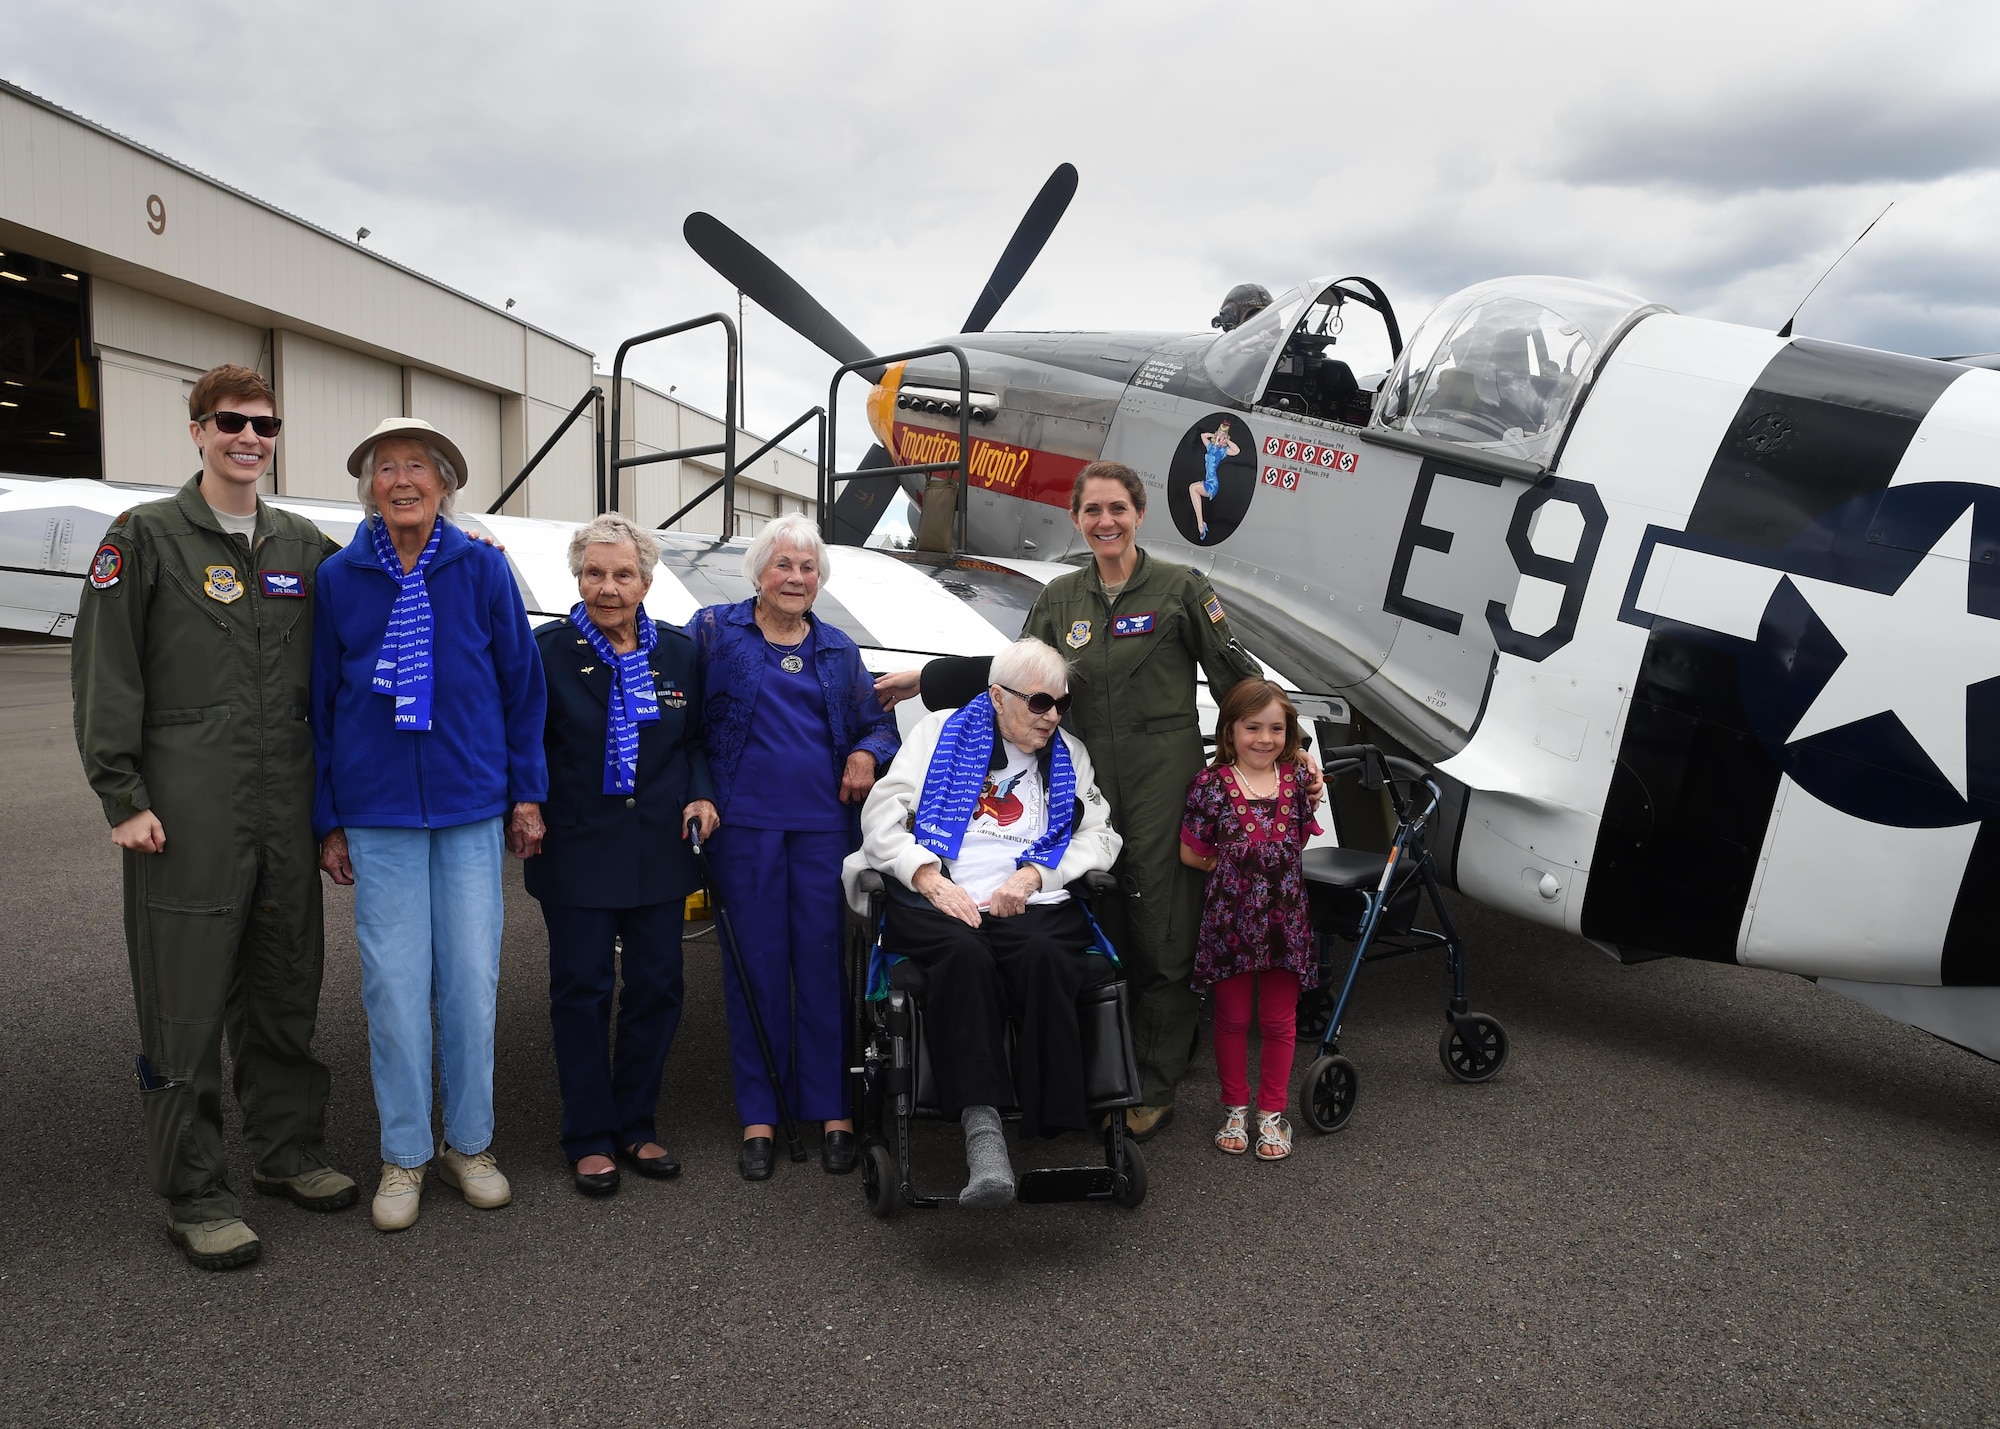 Four female Women Airforce Service Pilots and two McChord C-17 pilots stand in front of a P-51 Mustang on the McChord Field Flight line July 10, 2016, at Joint Base Lewis-McChord, Wash. Dorothy Olsen, WASP, celebrated her 100th birthday at McChord along with three fellow WASPs and their families at McChord. Olsen received a Congressional Gold Medal in March 2010 for her service during World War II. (Air Force Photo/Staff Sgt. Naomi Shipley)